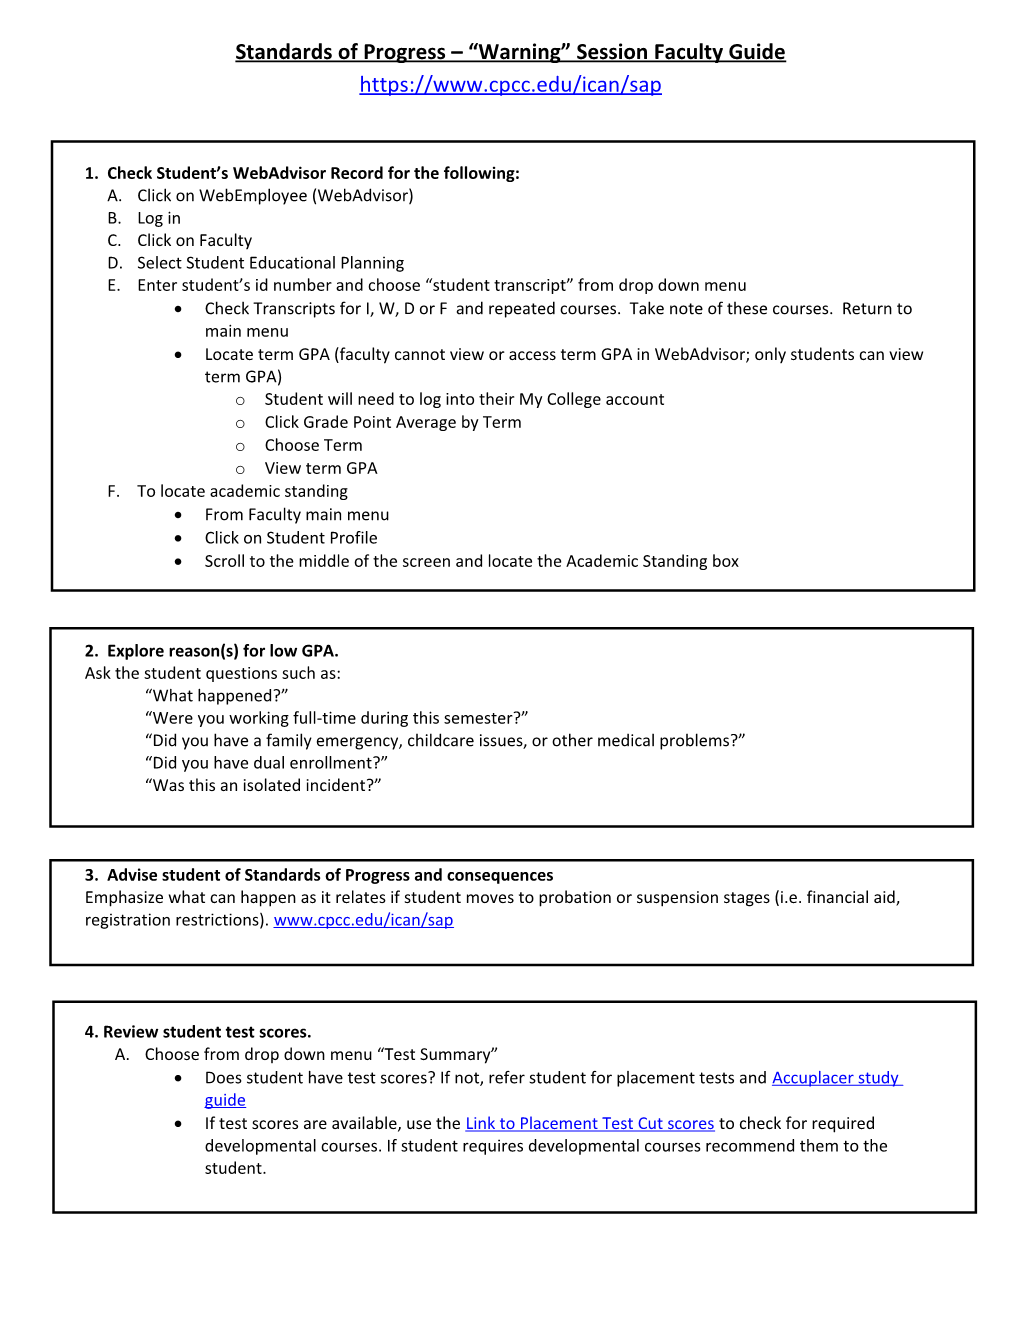 Standards of Progress Warning Session Faculty Guide